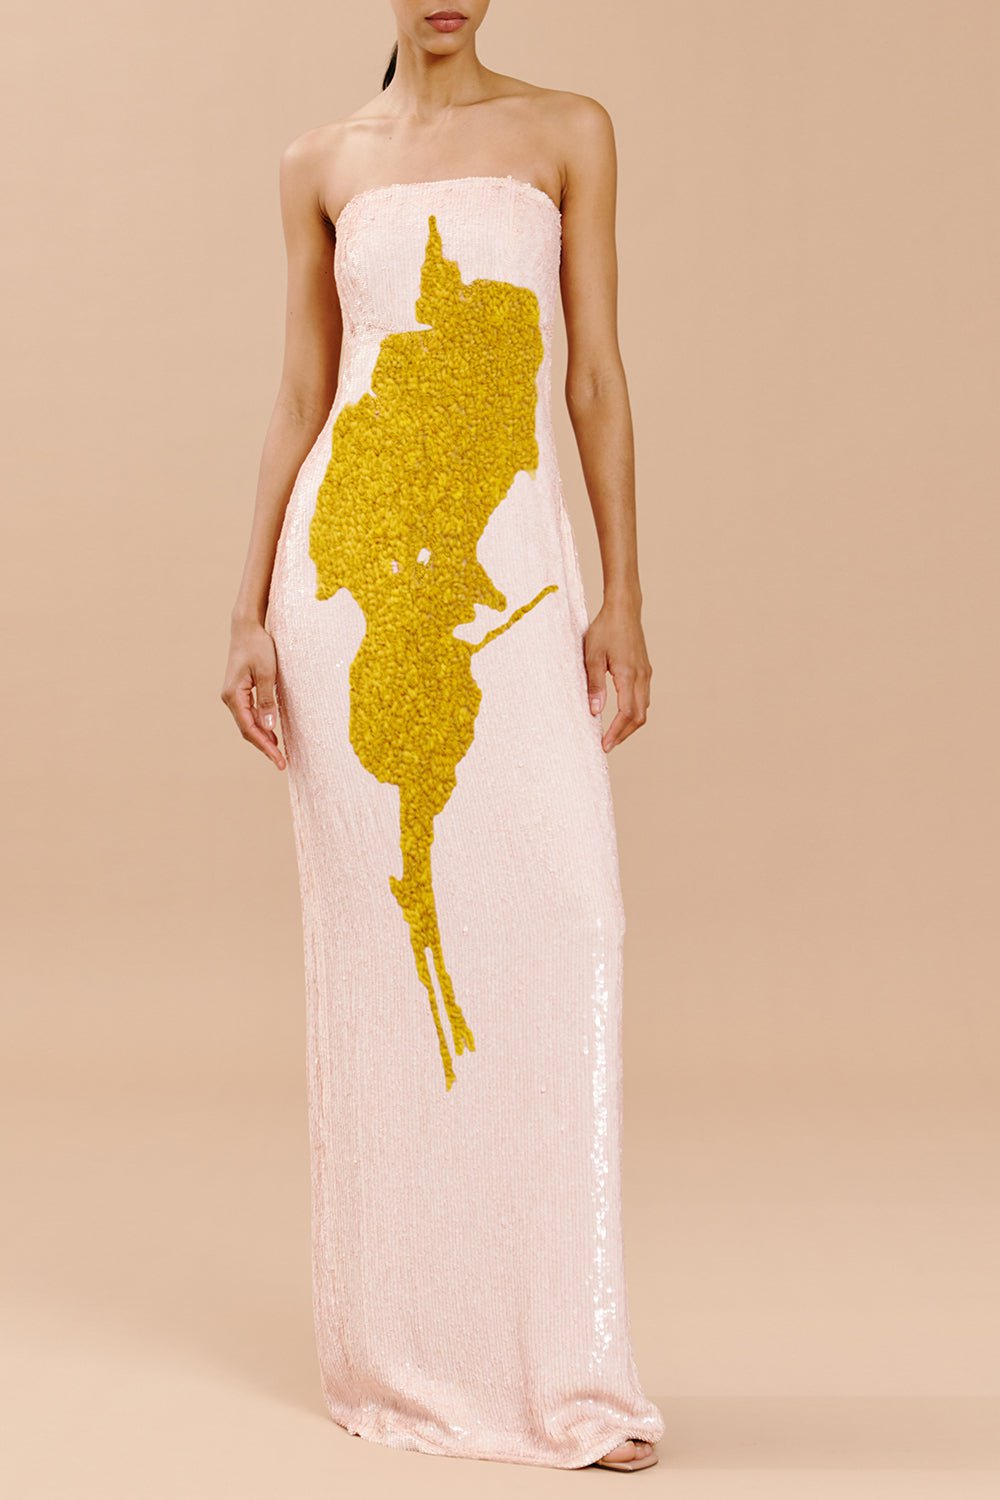 SILVIA TCHERASSI-Margaret Gown-YELLOW NUDE FLORAL